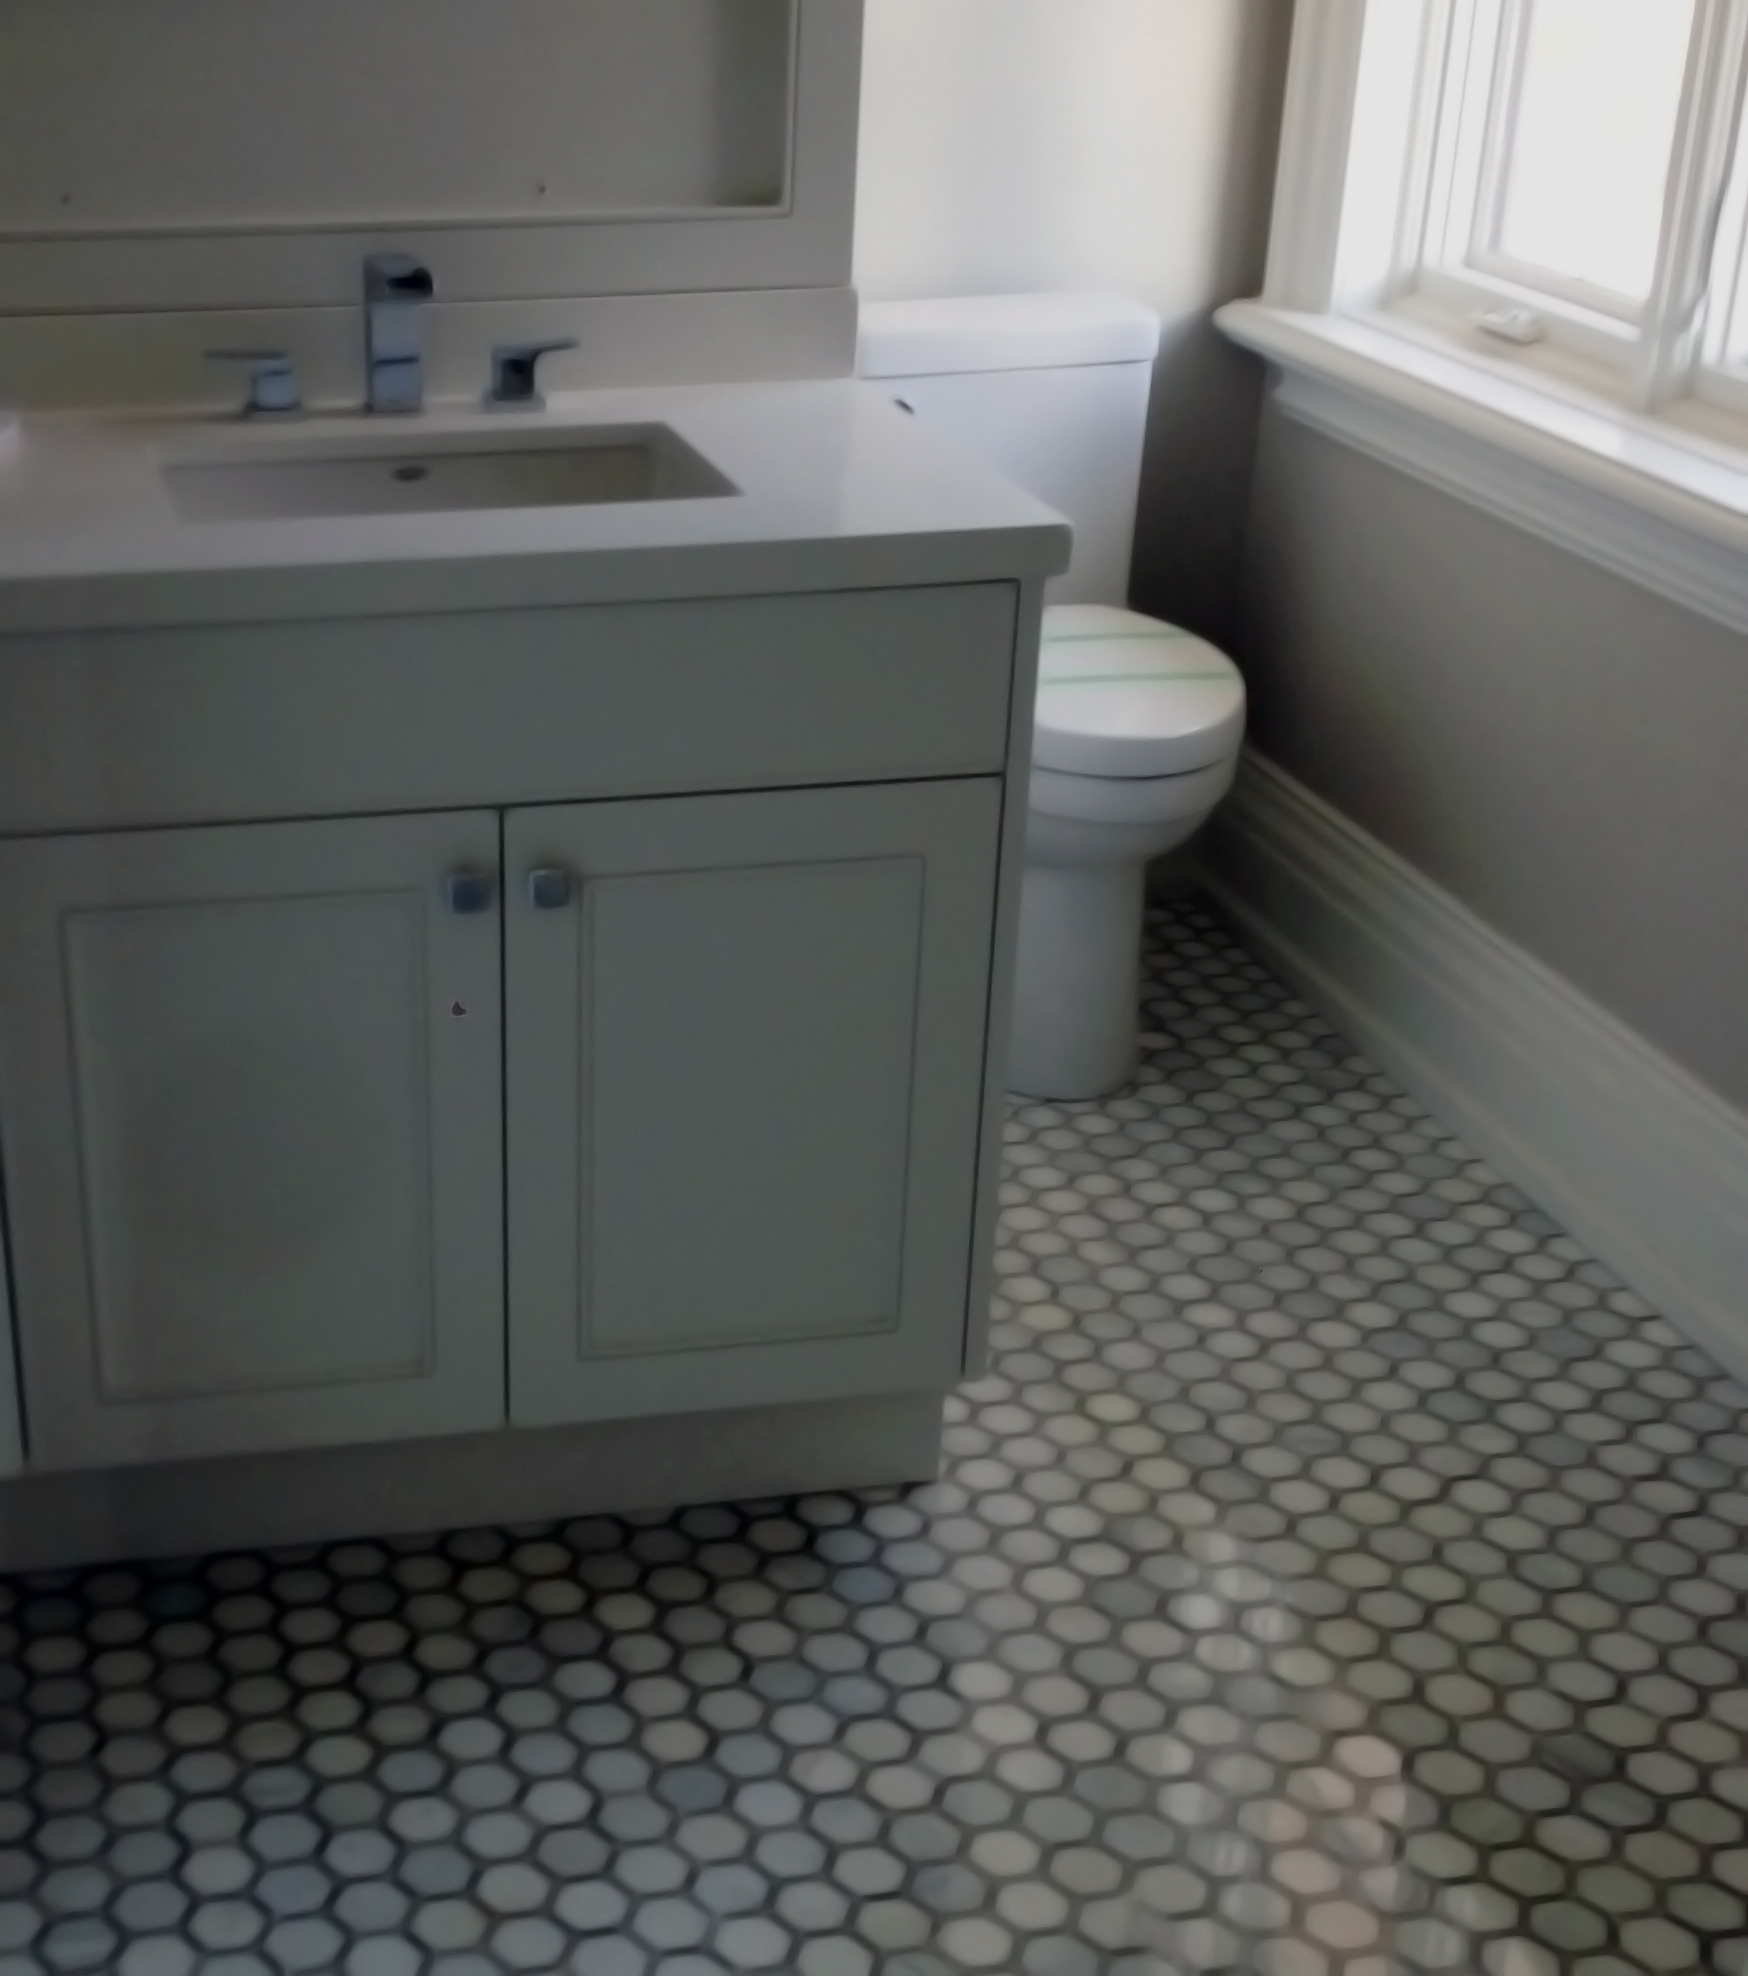 Minimalistic, Neutral Bathroom with Patterned Floor Tiling